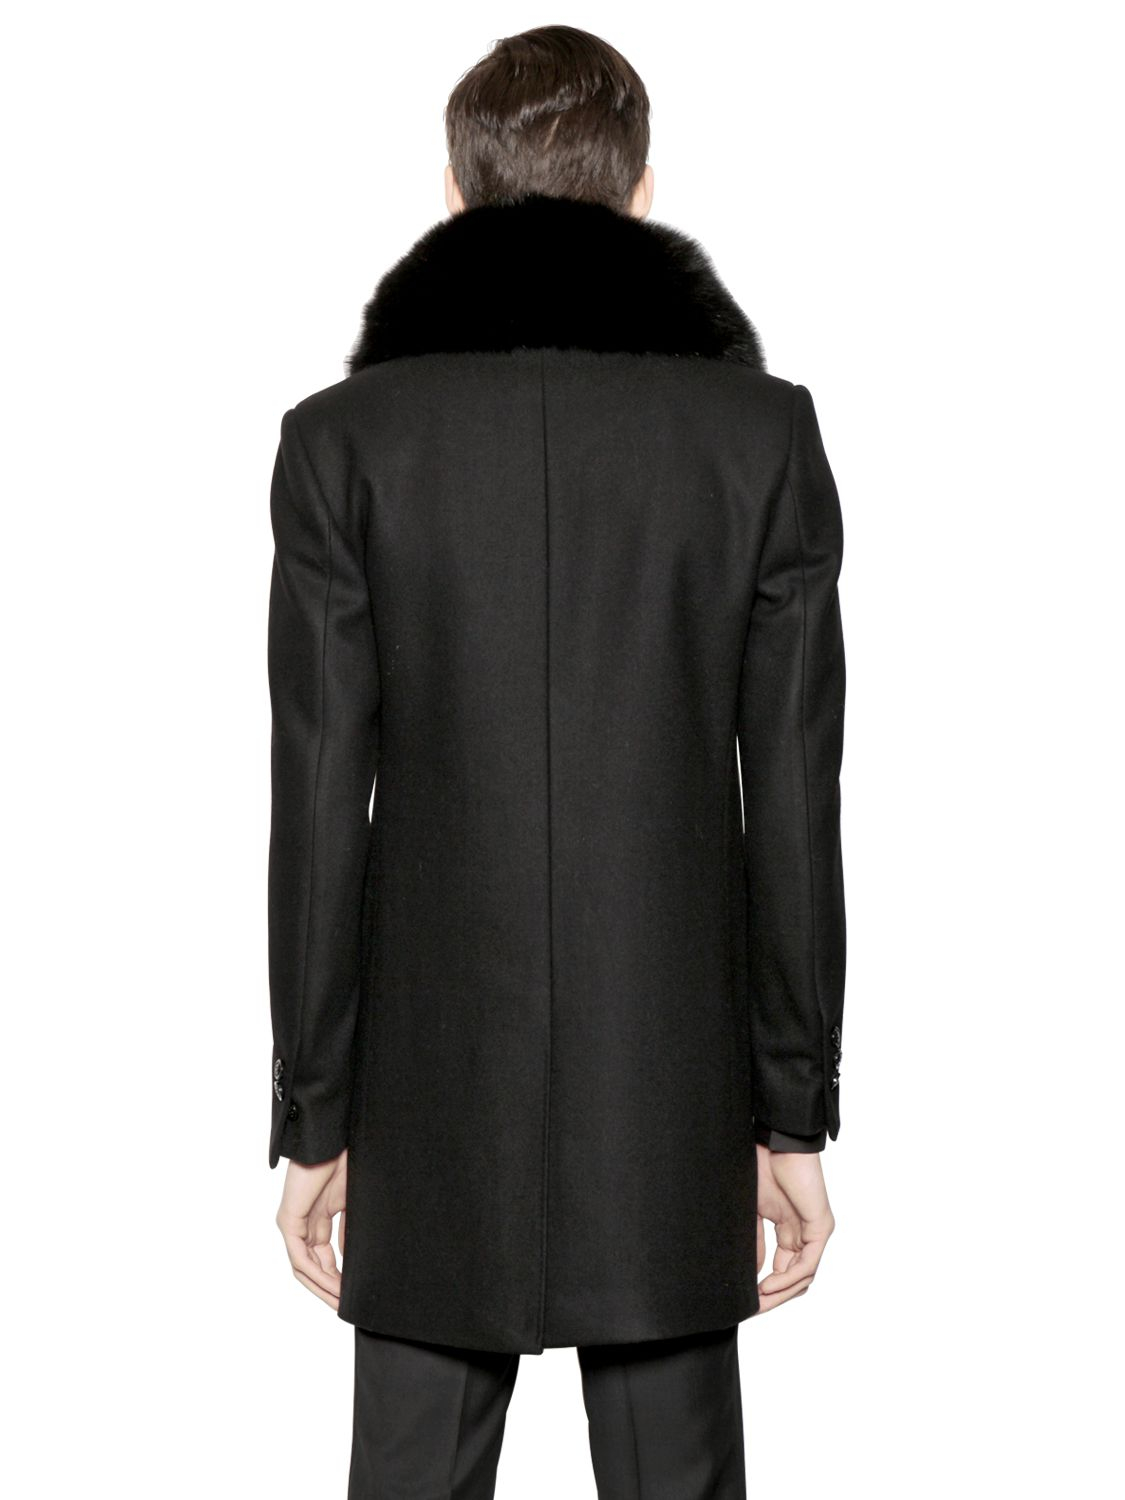 Lyst - Lords & Fools Wool Blend Coat With Fox Fur Collar in Black for Men